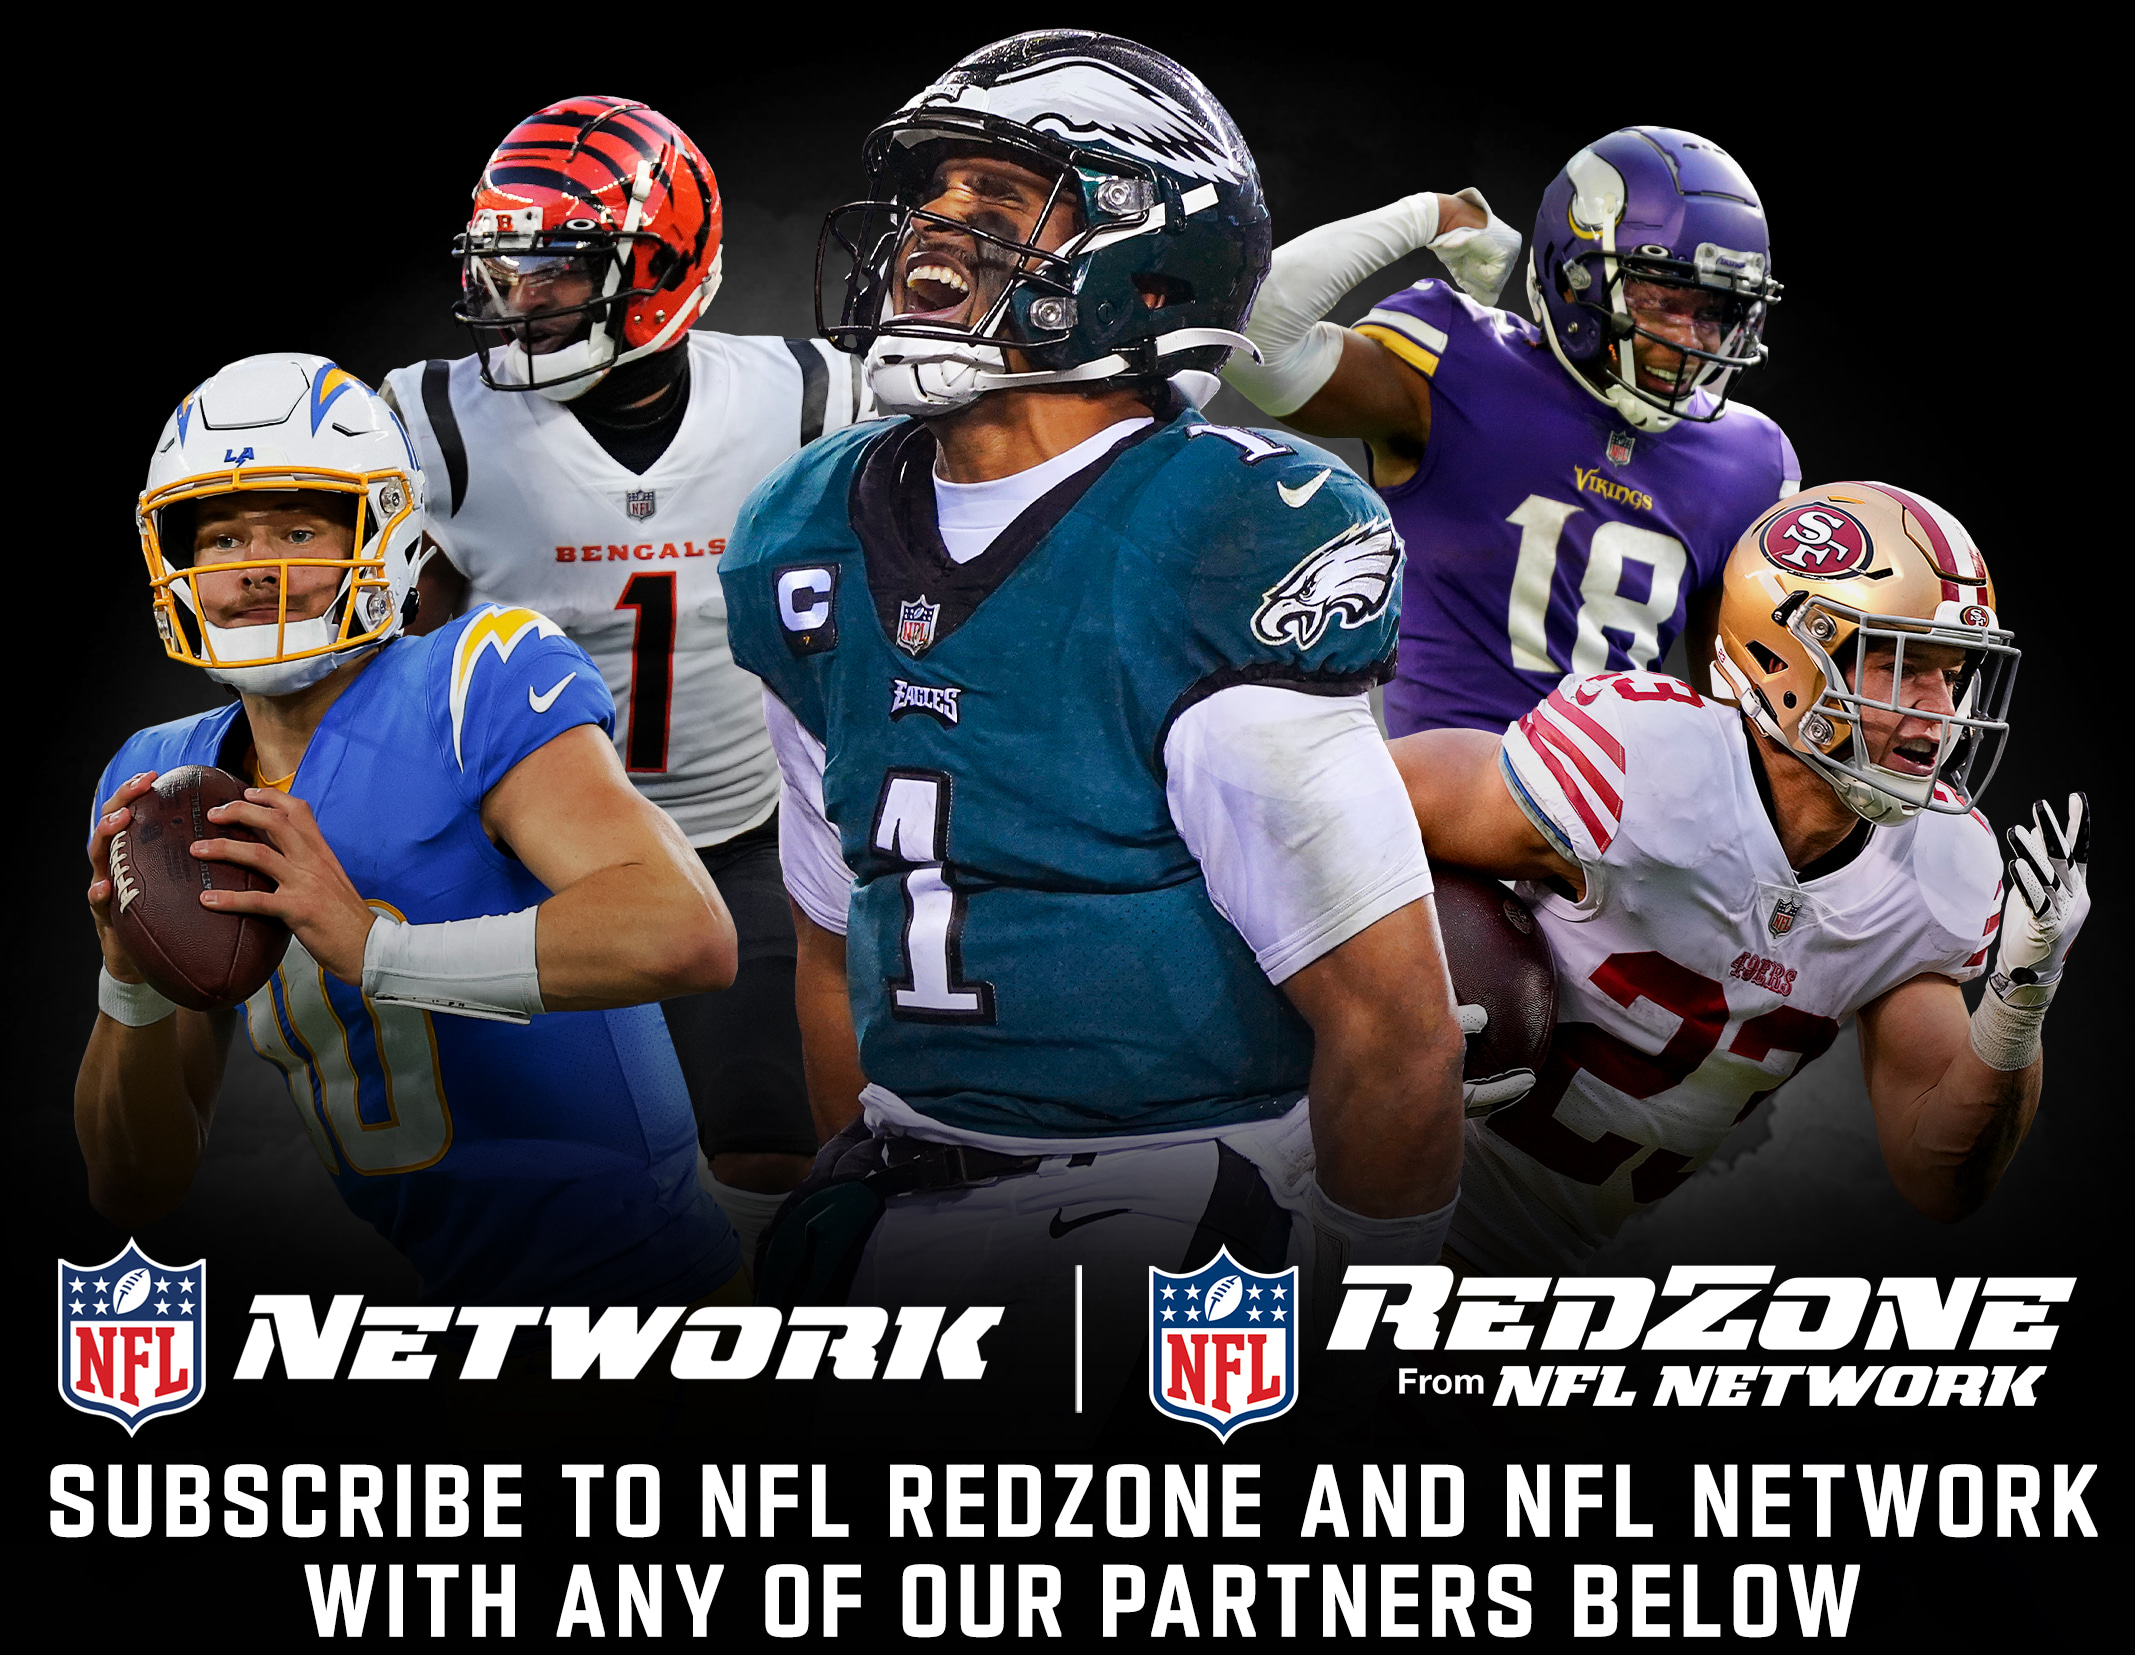 what network is showing the nfl game tonight